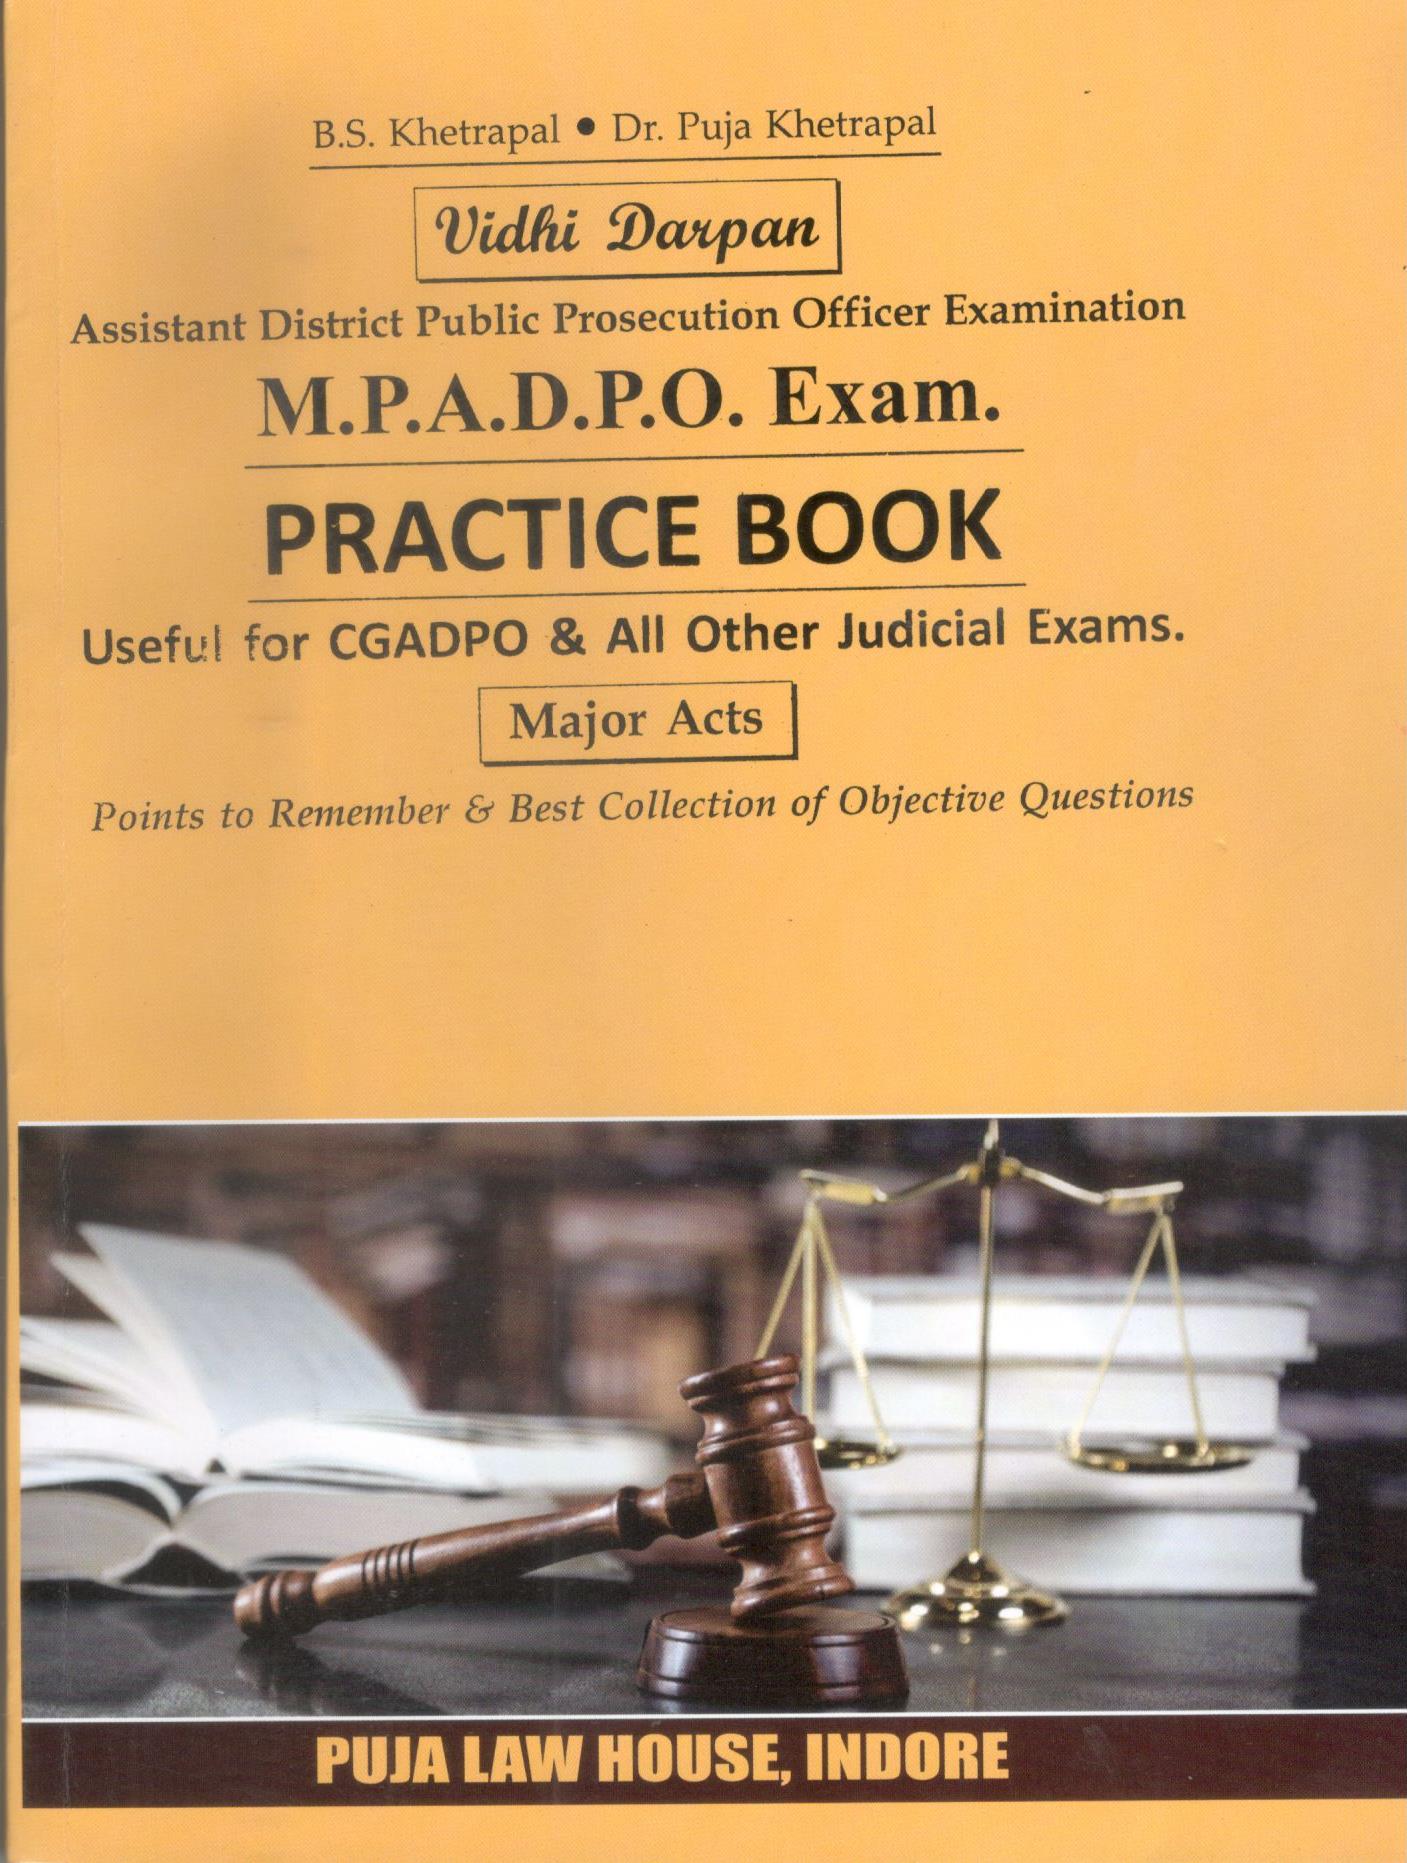 Vidhi Darpan - Assistant District Public Prosecution Officer Examination [M.P.A.D.P.O. EXAM.] PRACTICE BOOK  (MAJOR ACTS)